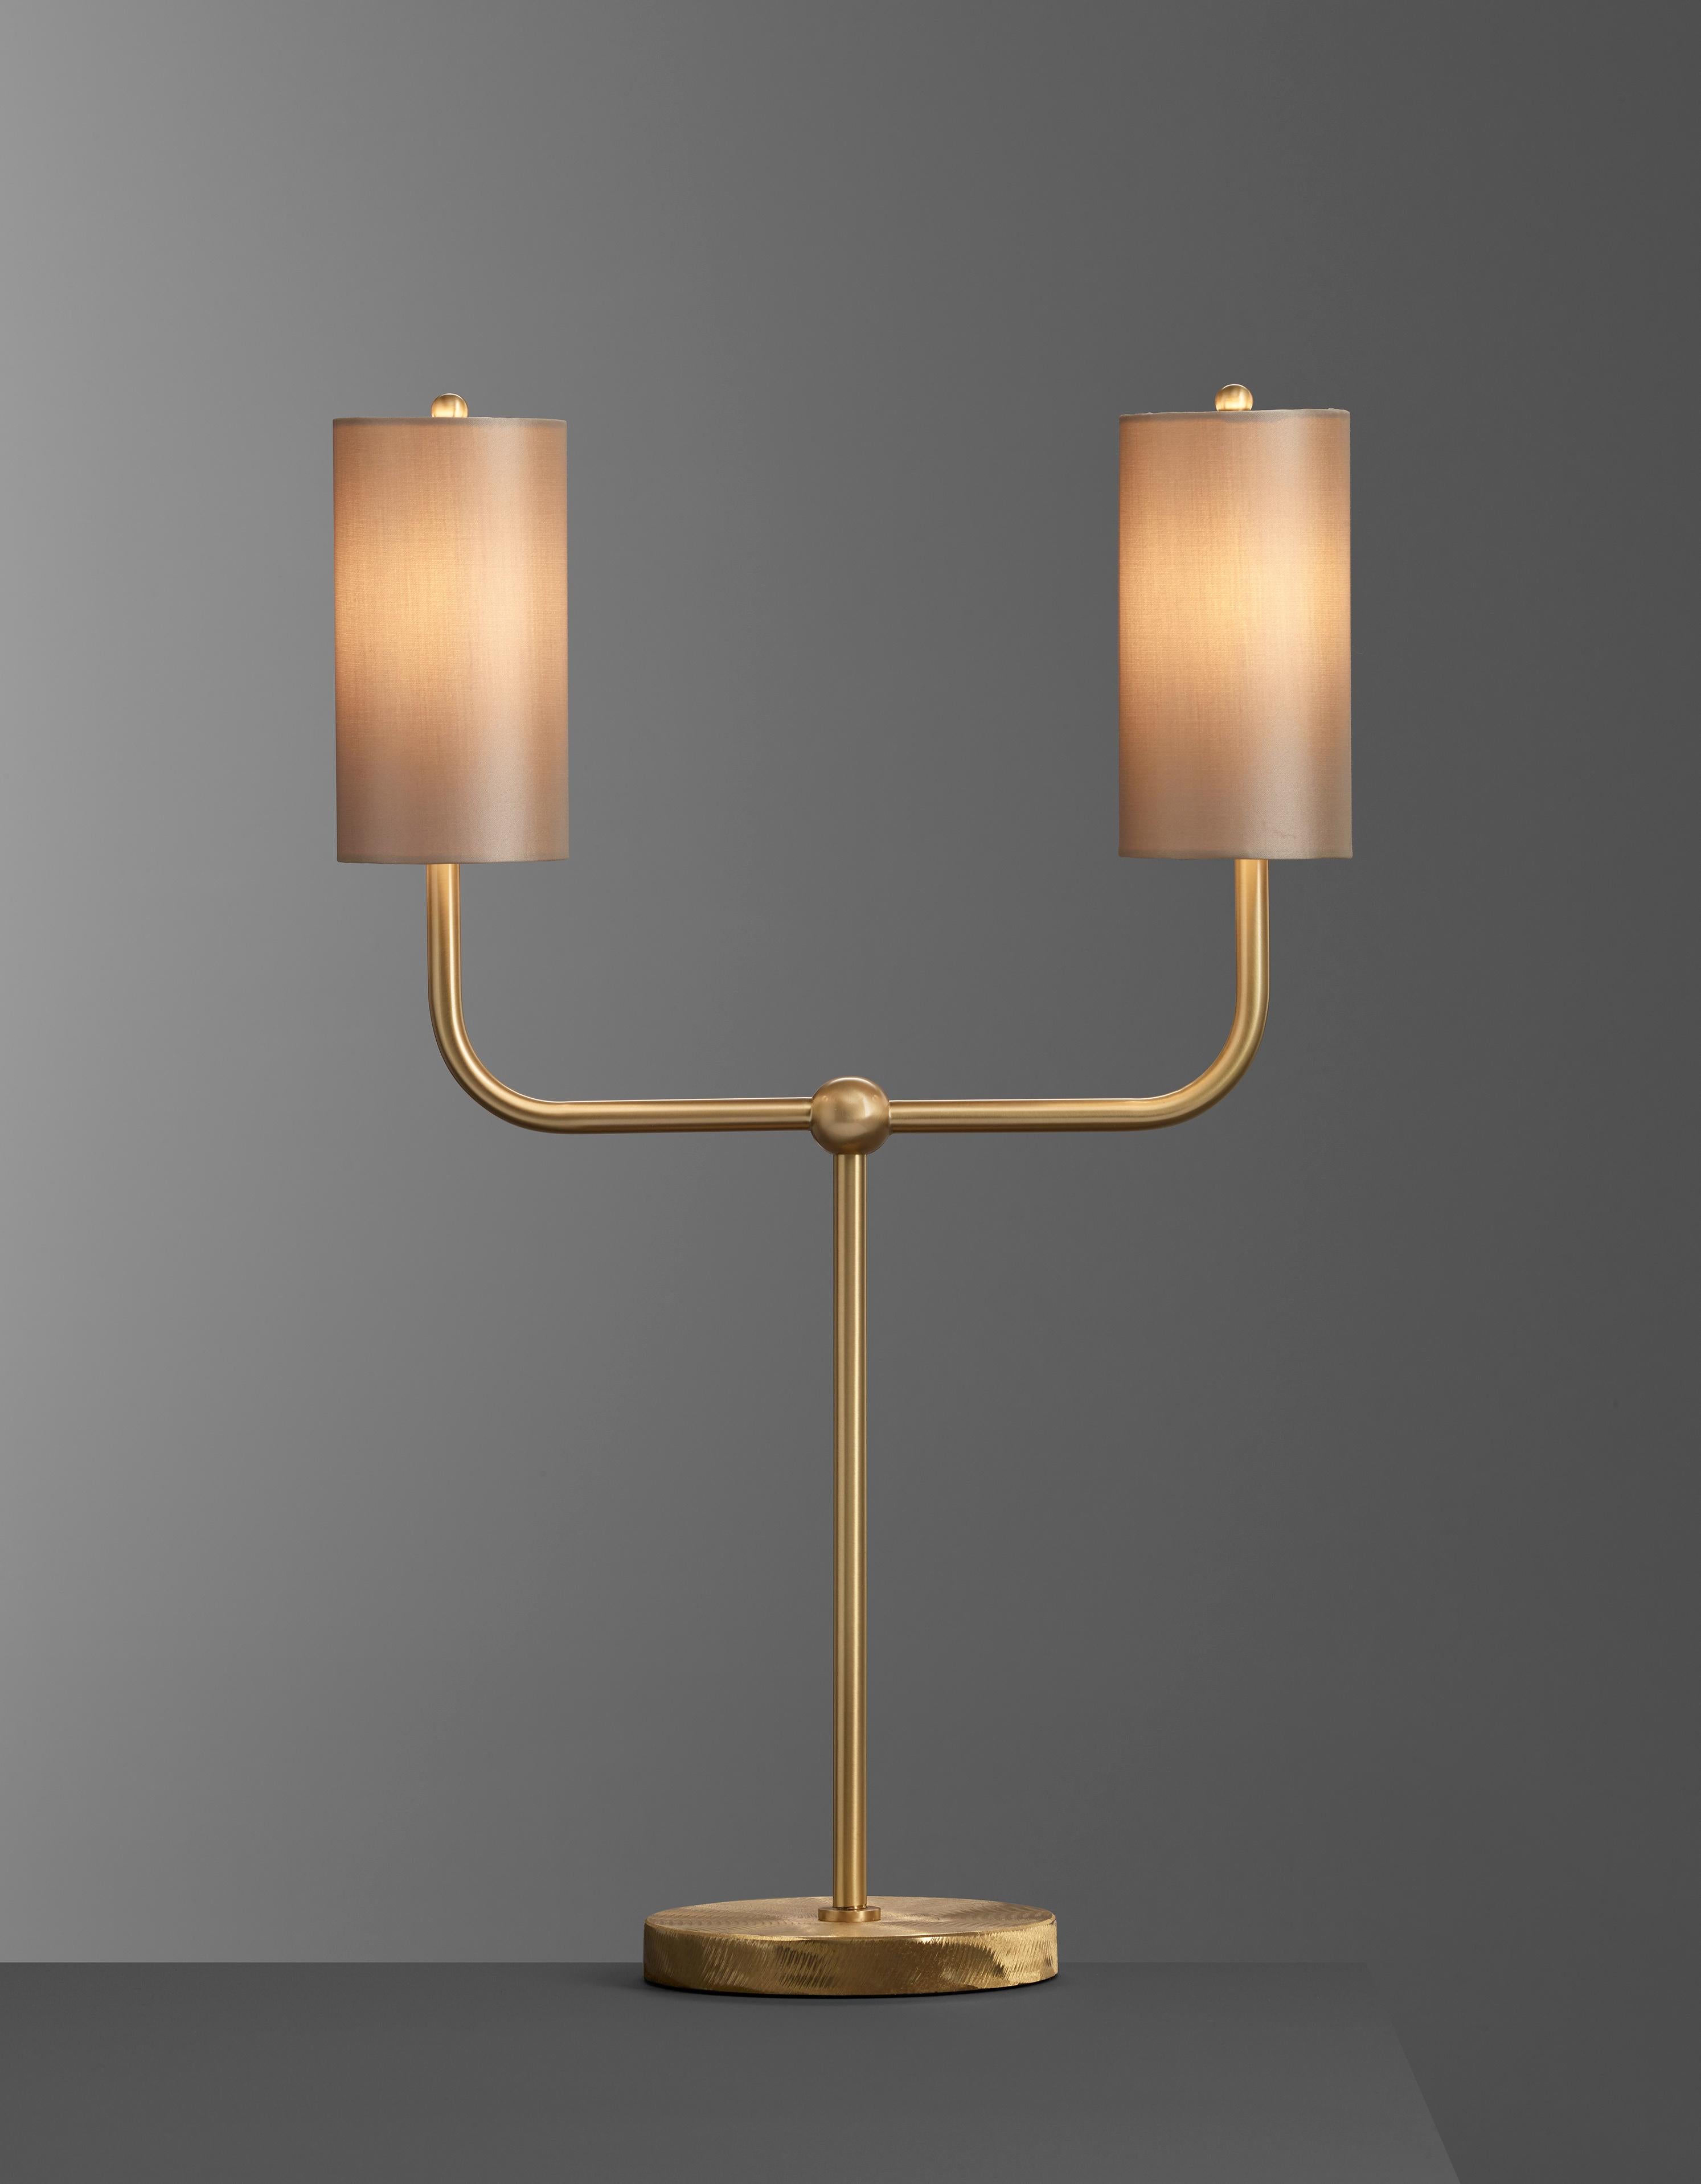 Imagin Classic Table Lamp in Brushed Brass and Fabric Shade In New Condition For Sale In Leighton Buzzard, GB